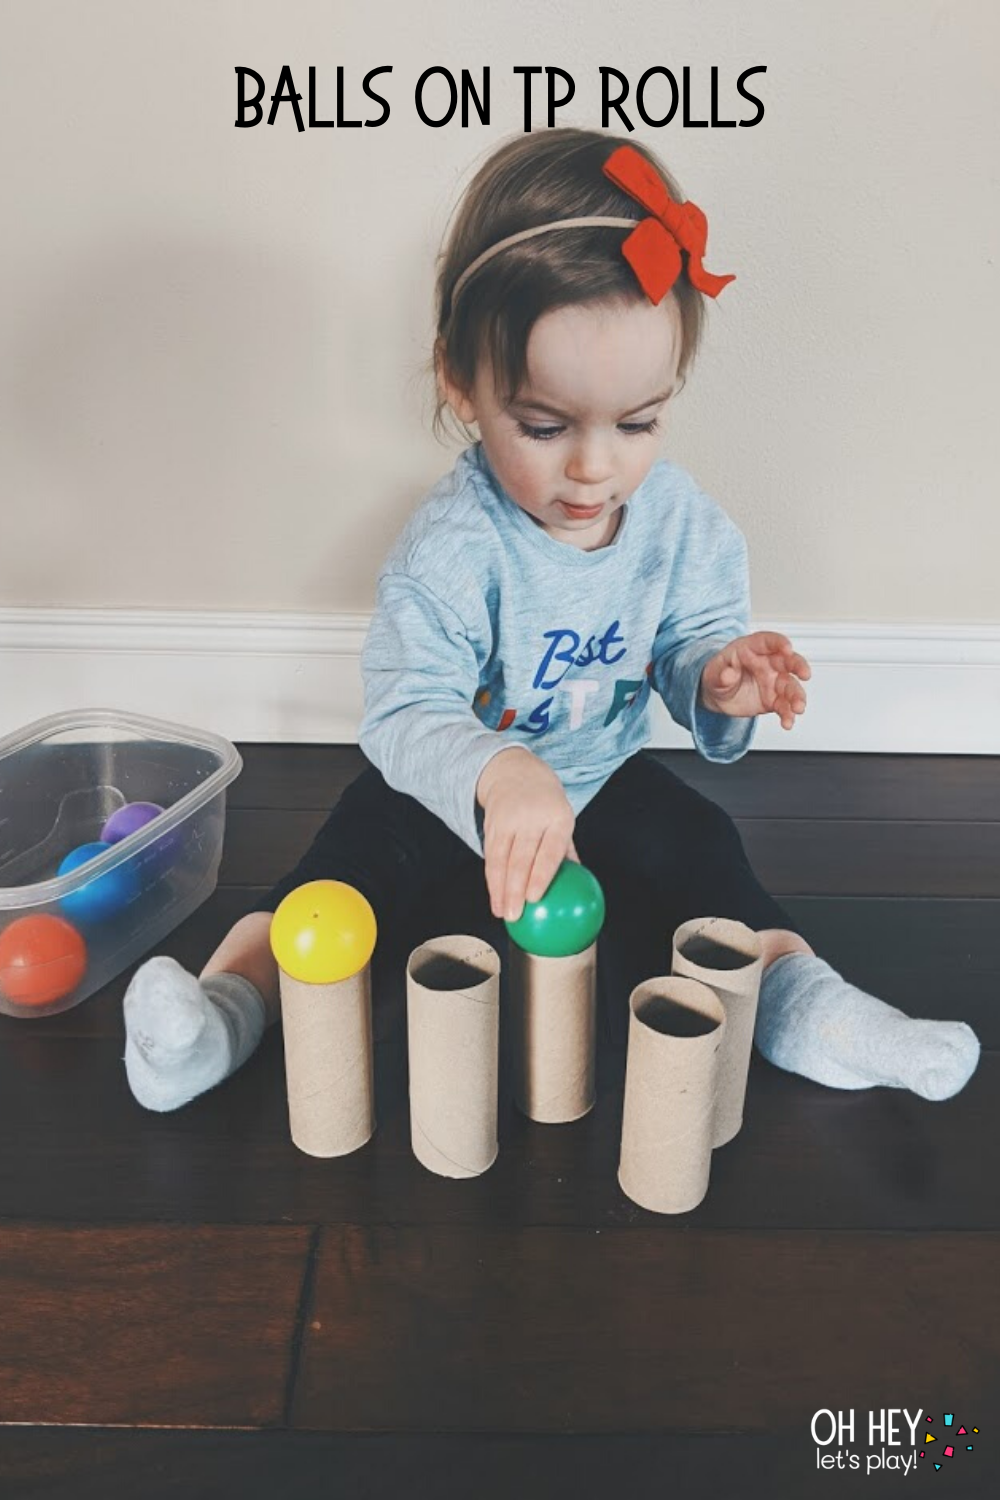 20 At-Home Learning Activities for Toddlers - Educational